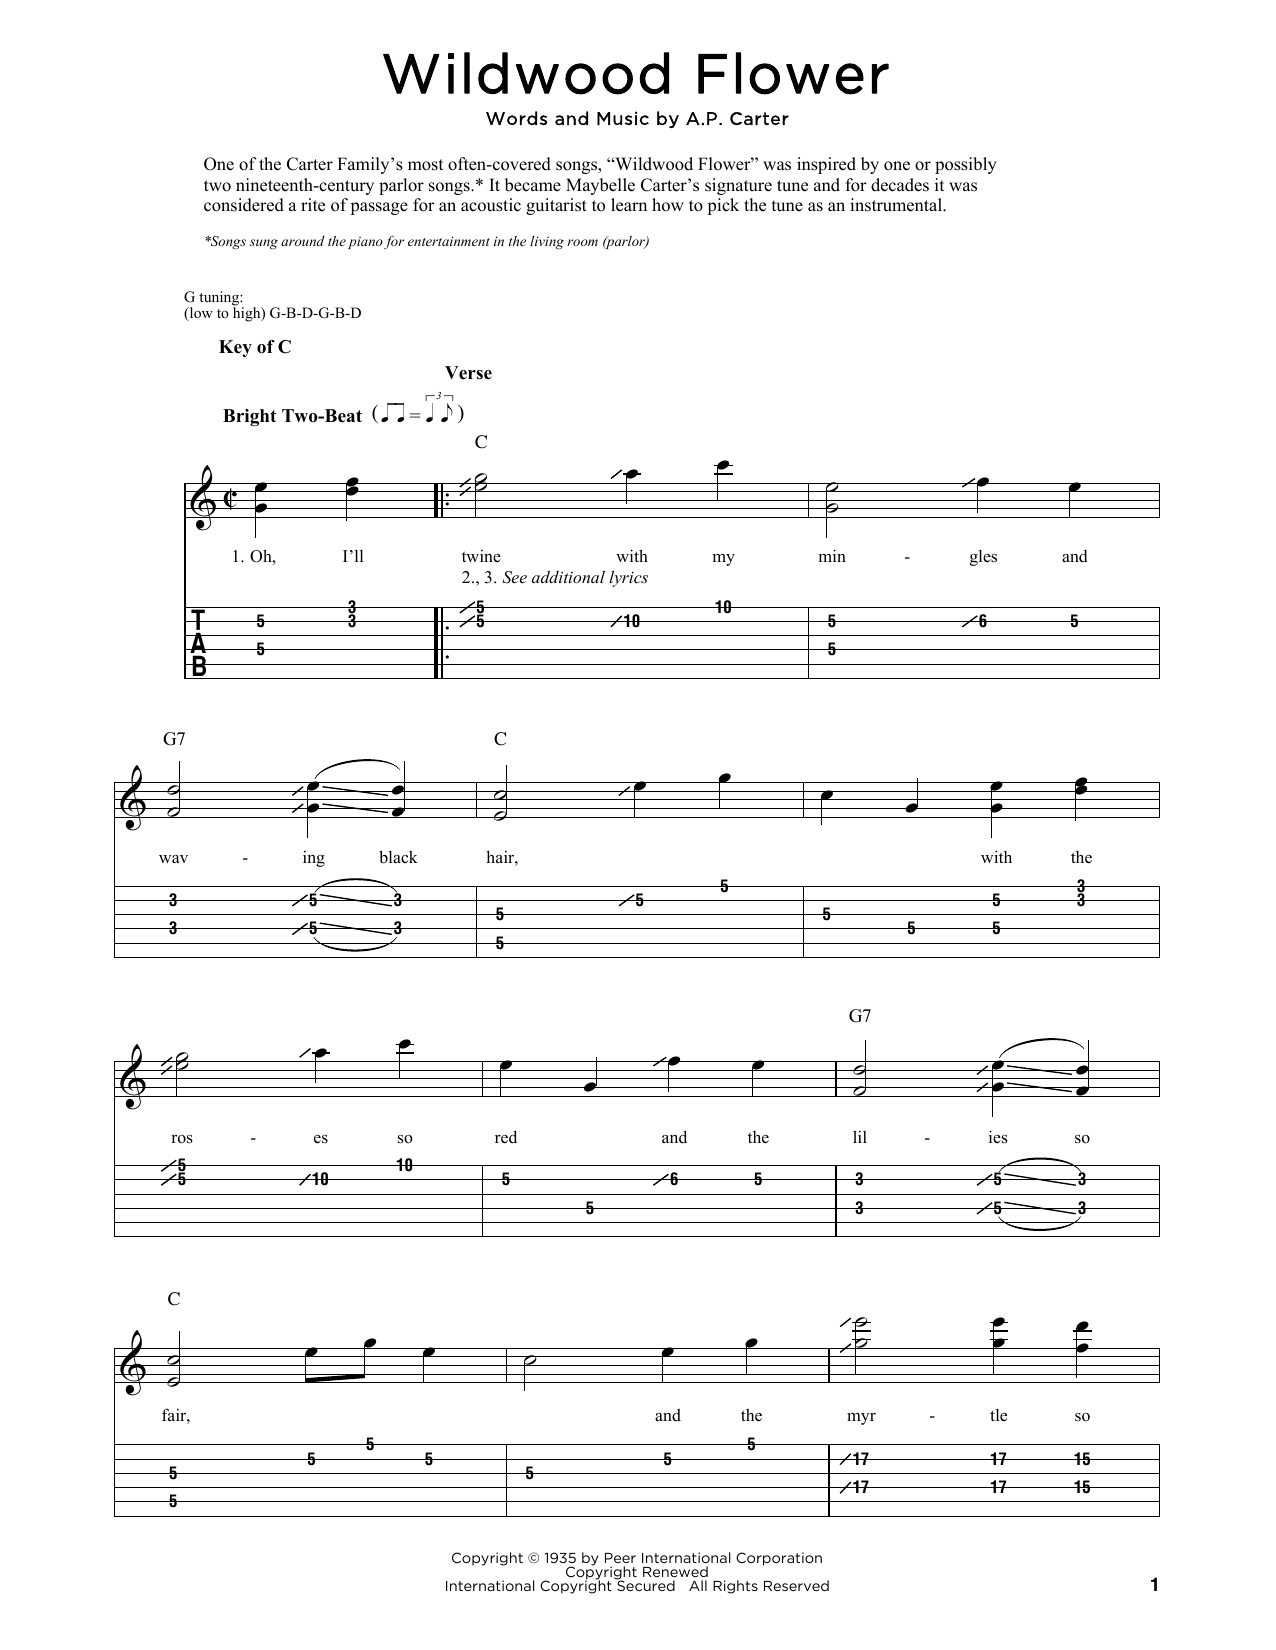 A.P. Carter Wildwood Flower sheet music notes and chords. Download Printable PDF.